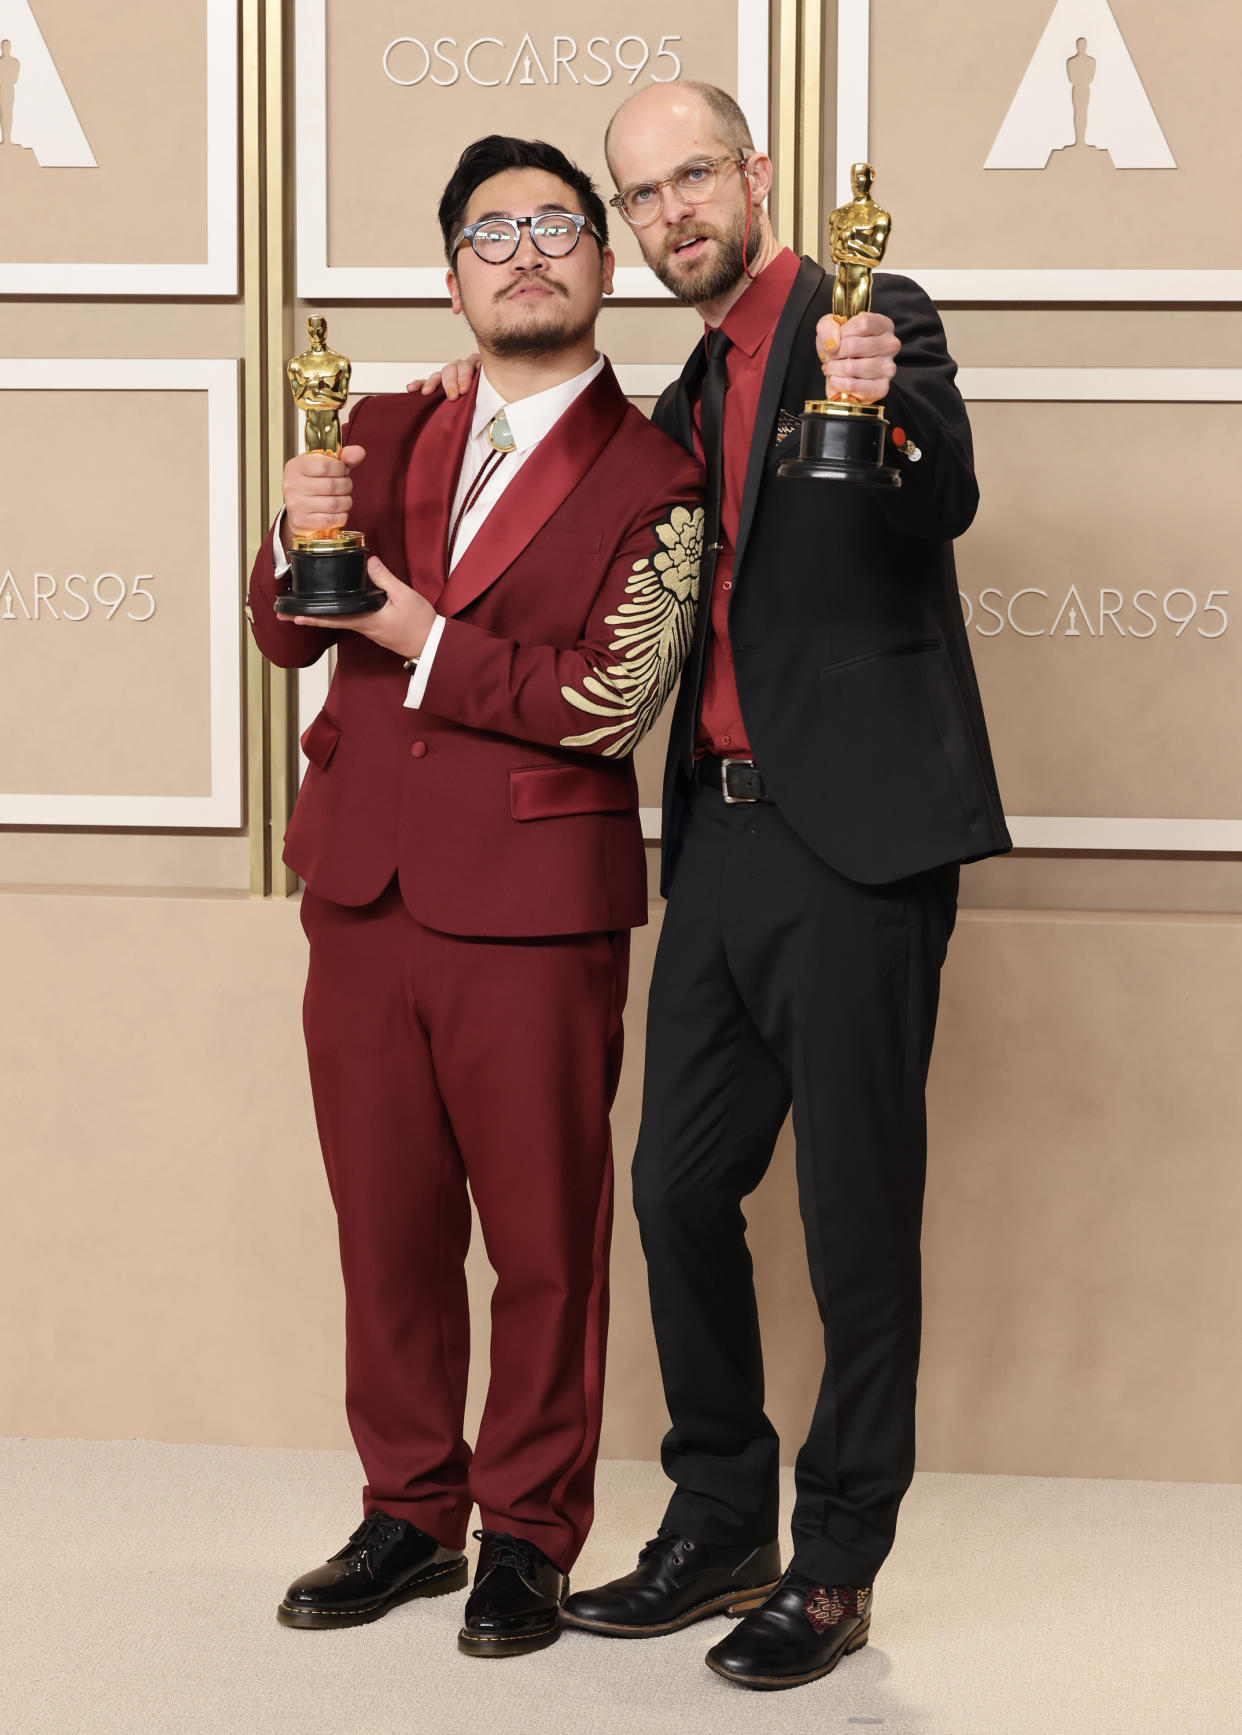 HOLLYWOOD, CALIFORNIA - MARCH 12: Daniel Kwan and Daniel Scheinert, winners of the Best Director award for ’Everything Everywhere All at Once’, pose in the press room during the 95th Annual Academy Awards at Ovation Hollywood on March 12, 2023 in Hollywood, California. (Photo by Rodin Eckenroth/Getty Images)